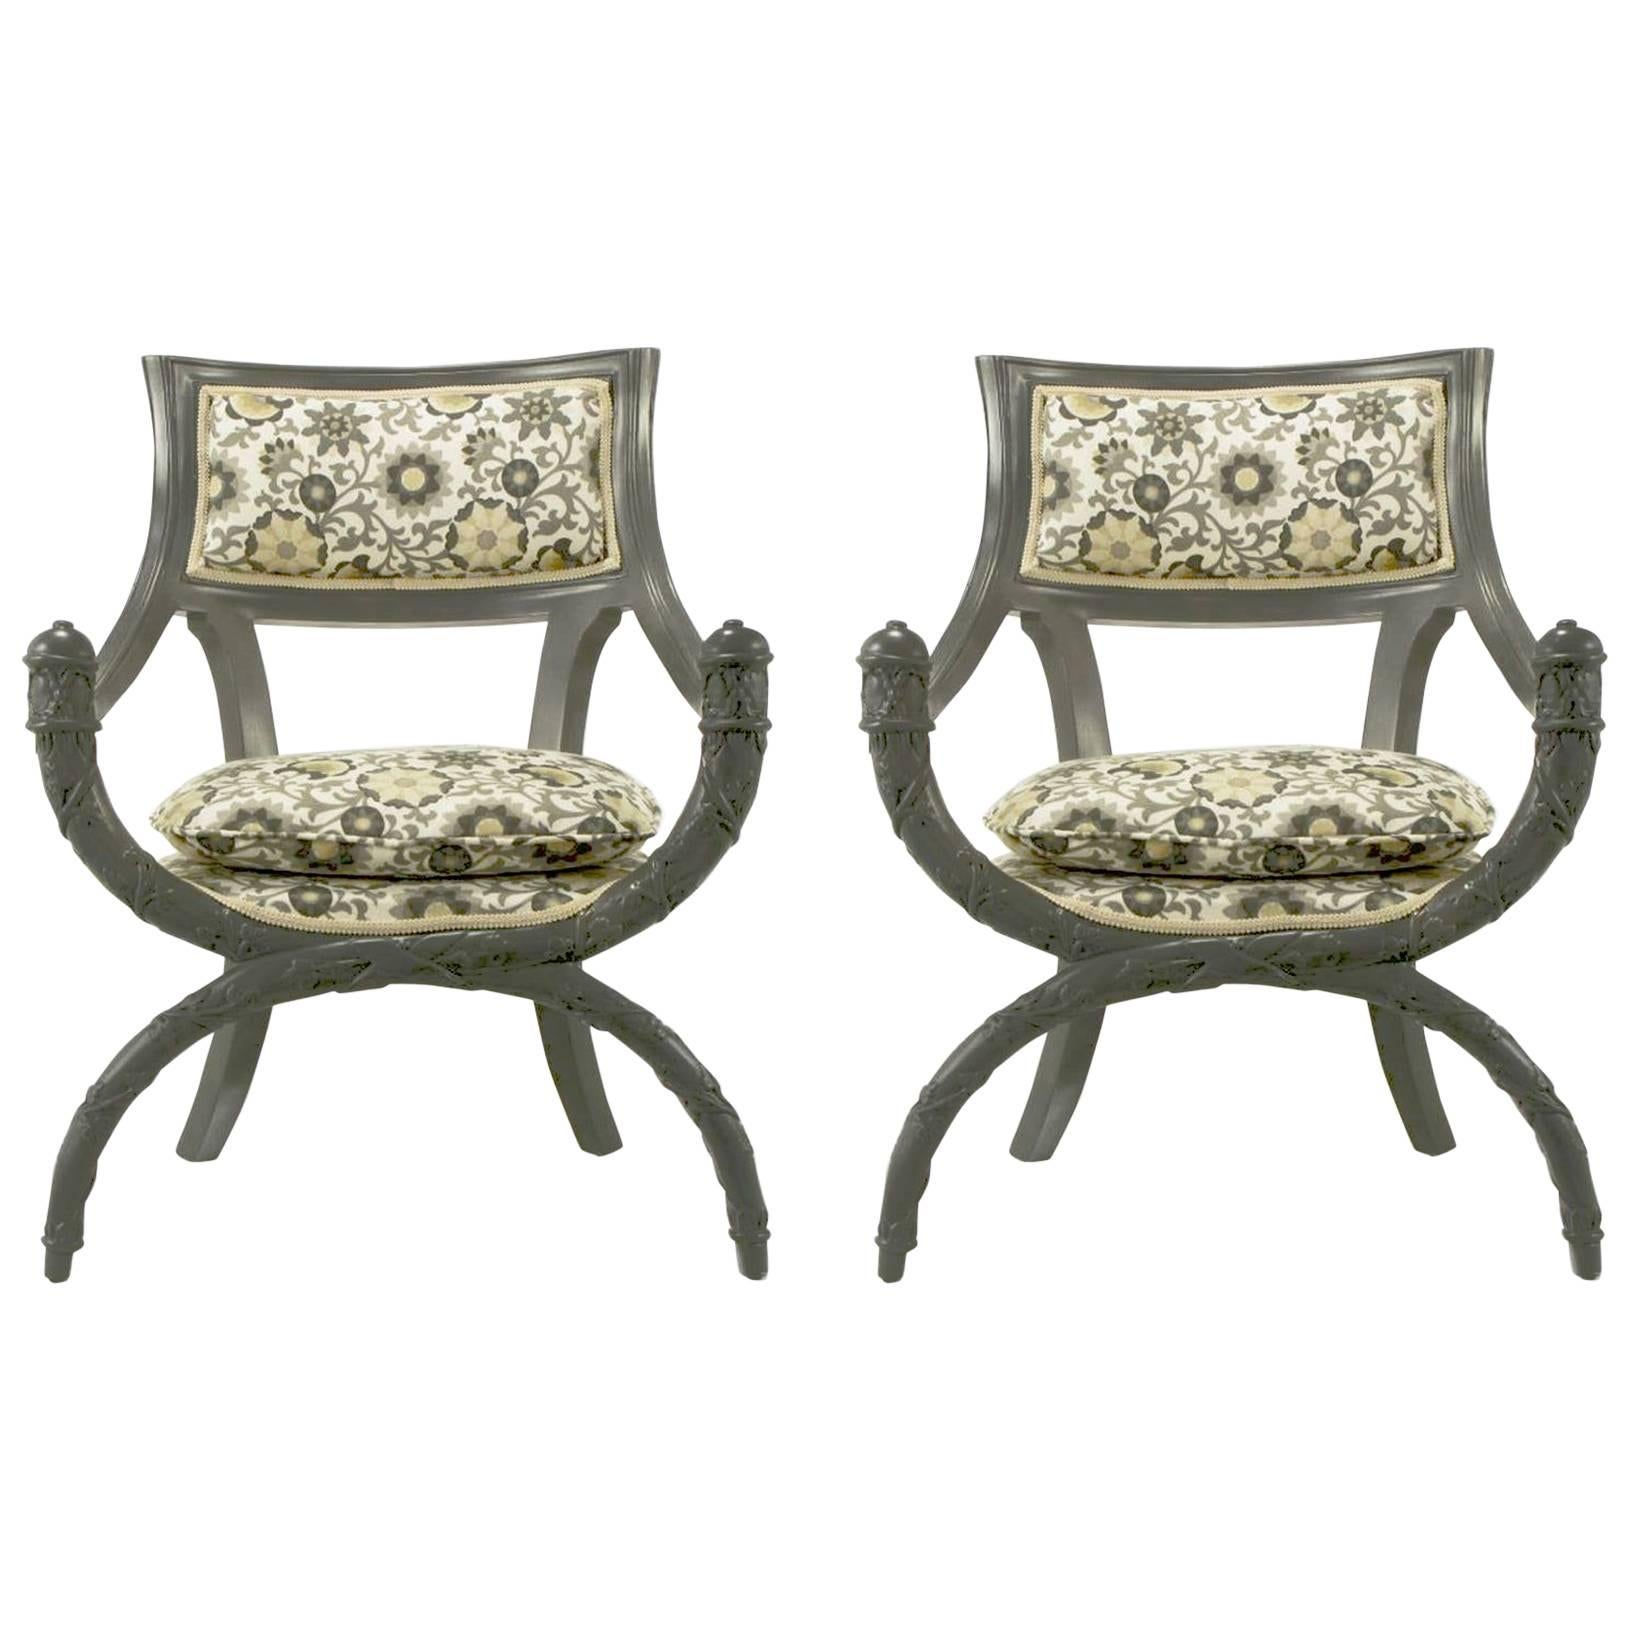 Pair of Carved Wood Curule Chairs in Slate Grey Lacquer